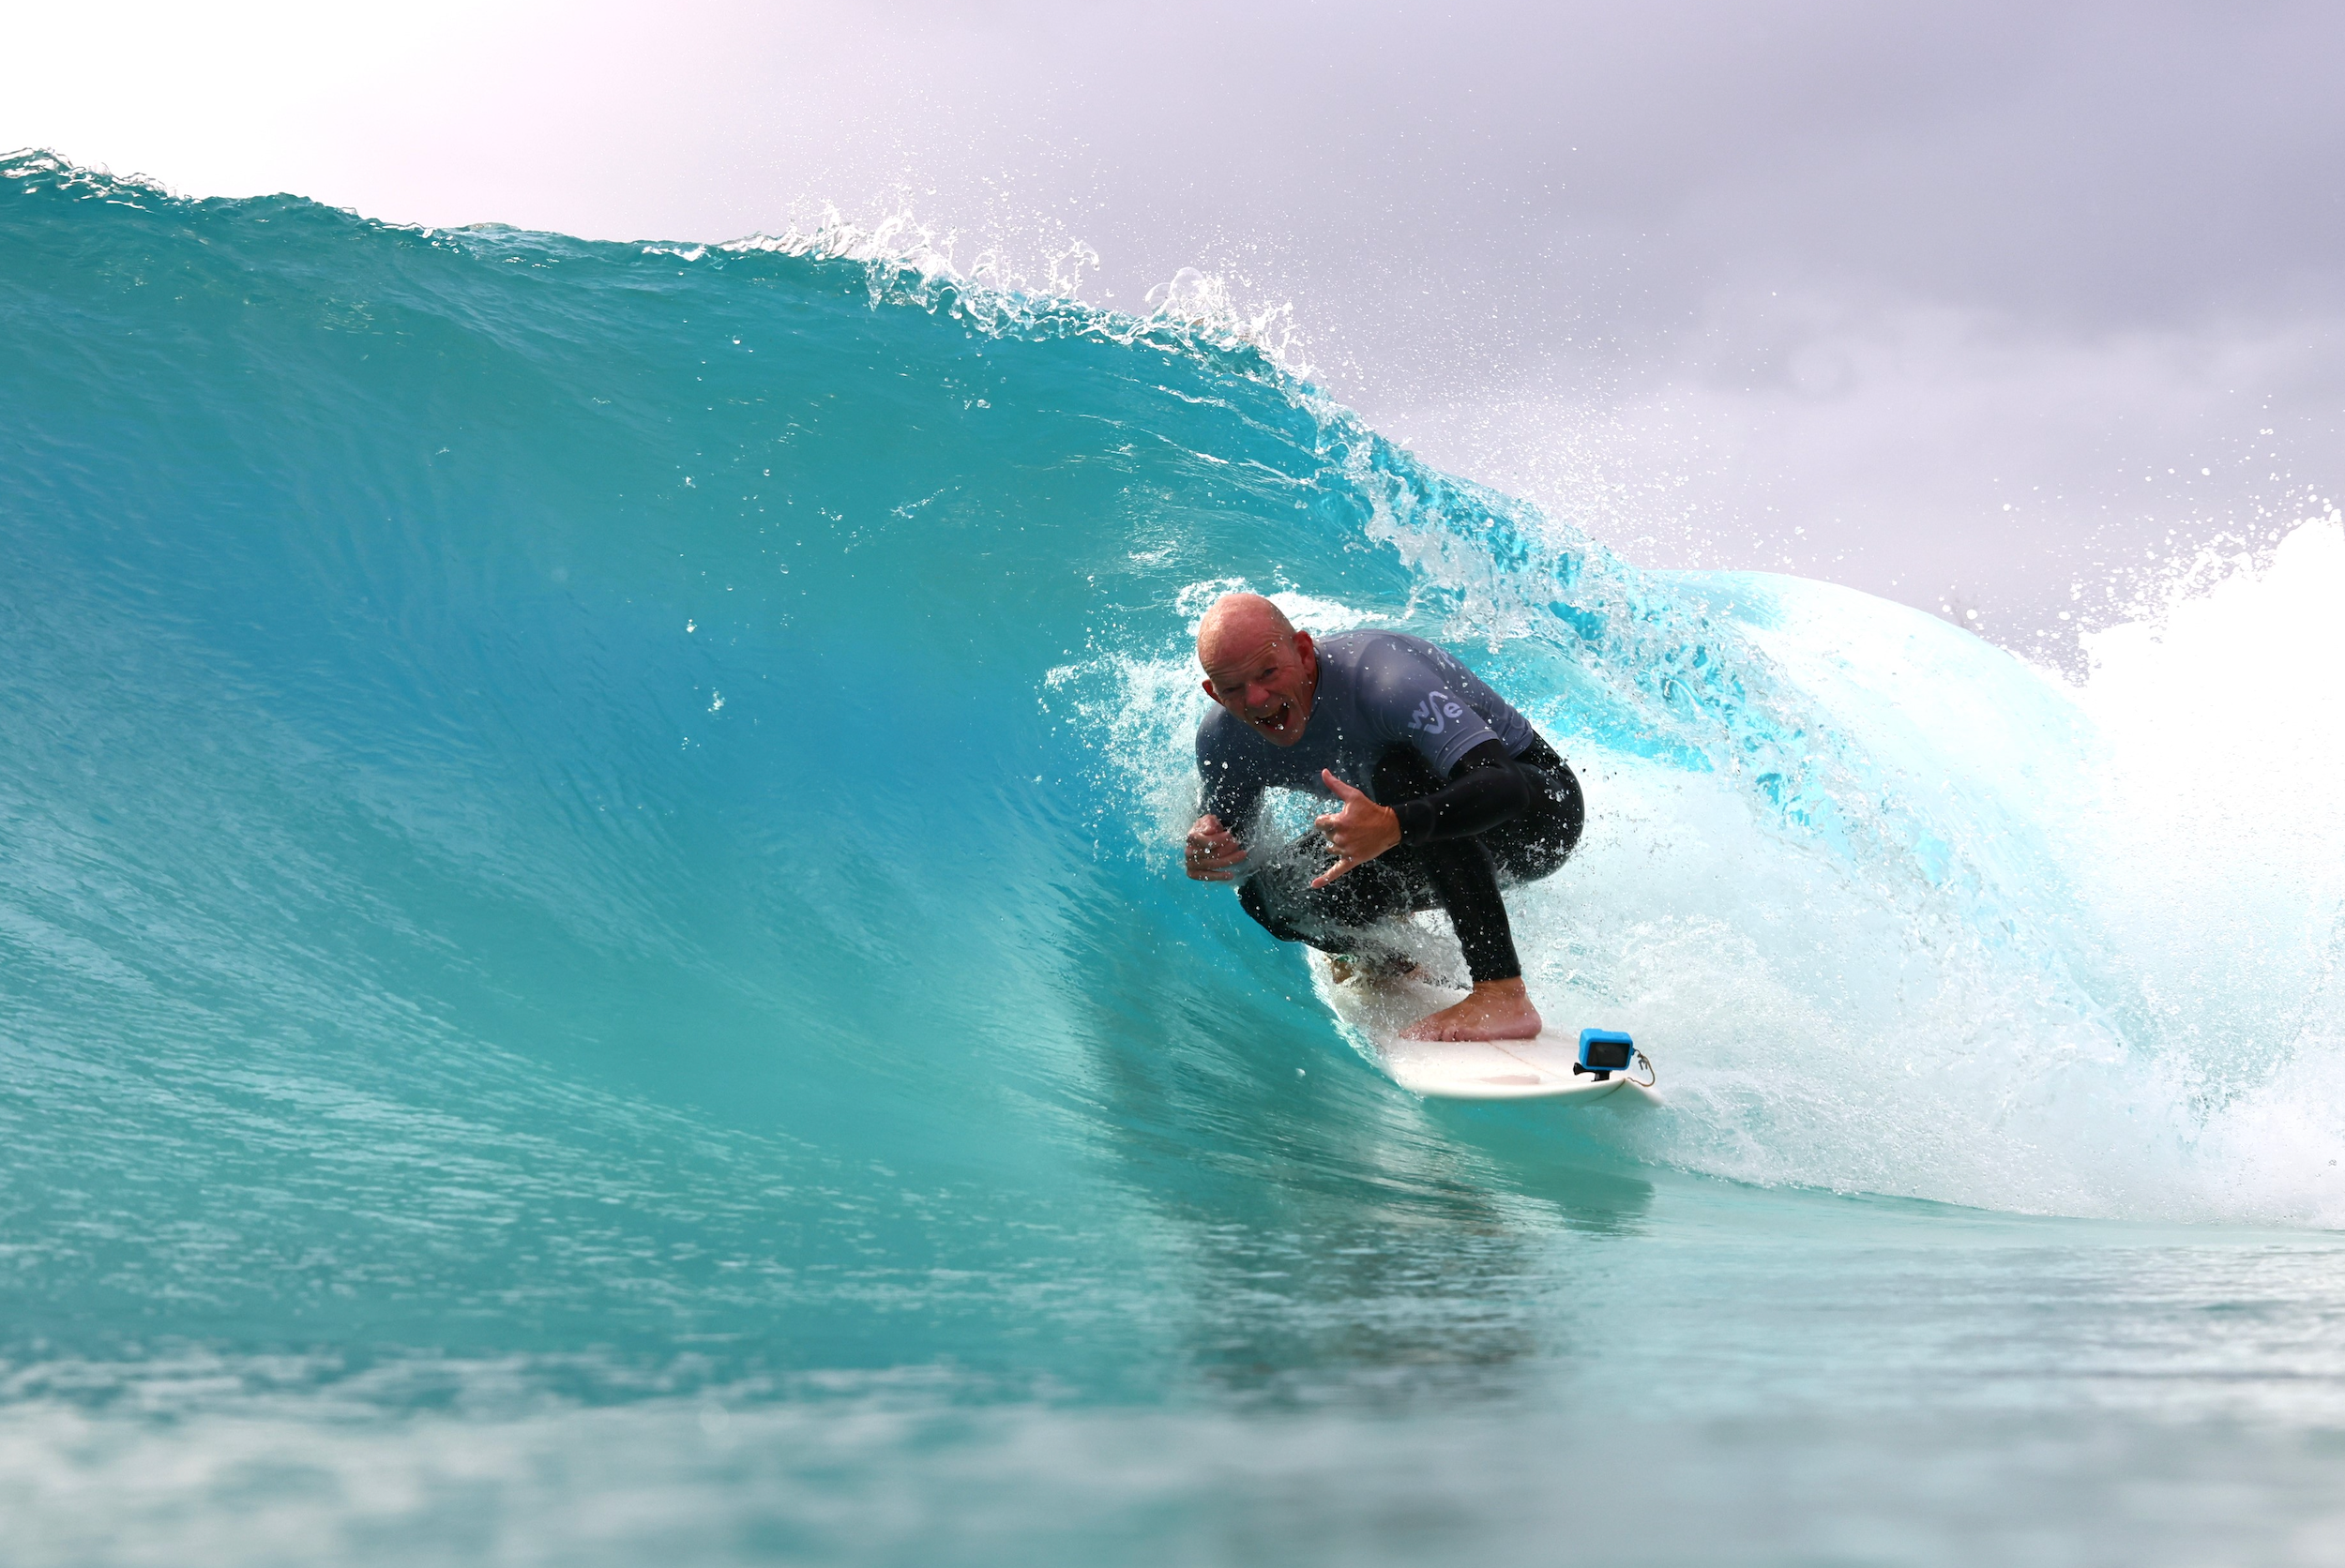 Surfing with Purpose: Phil Williams' Odyssey of Faith, Waves, and Community